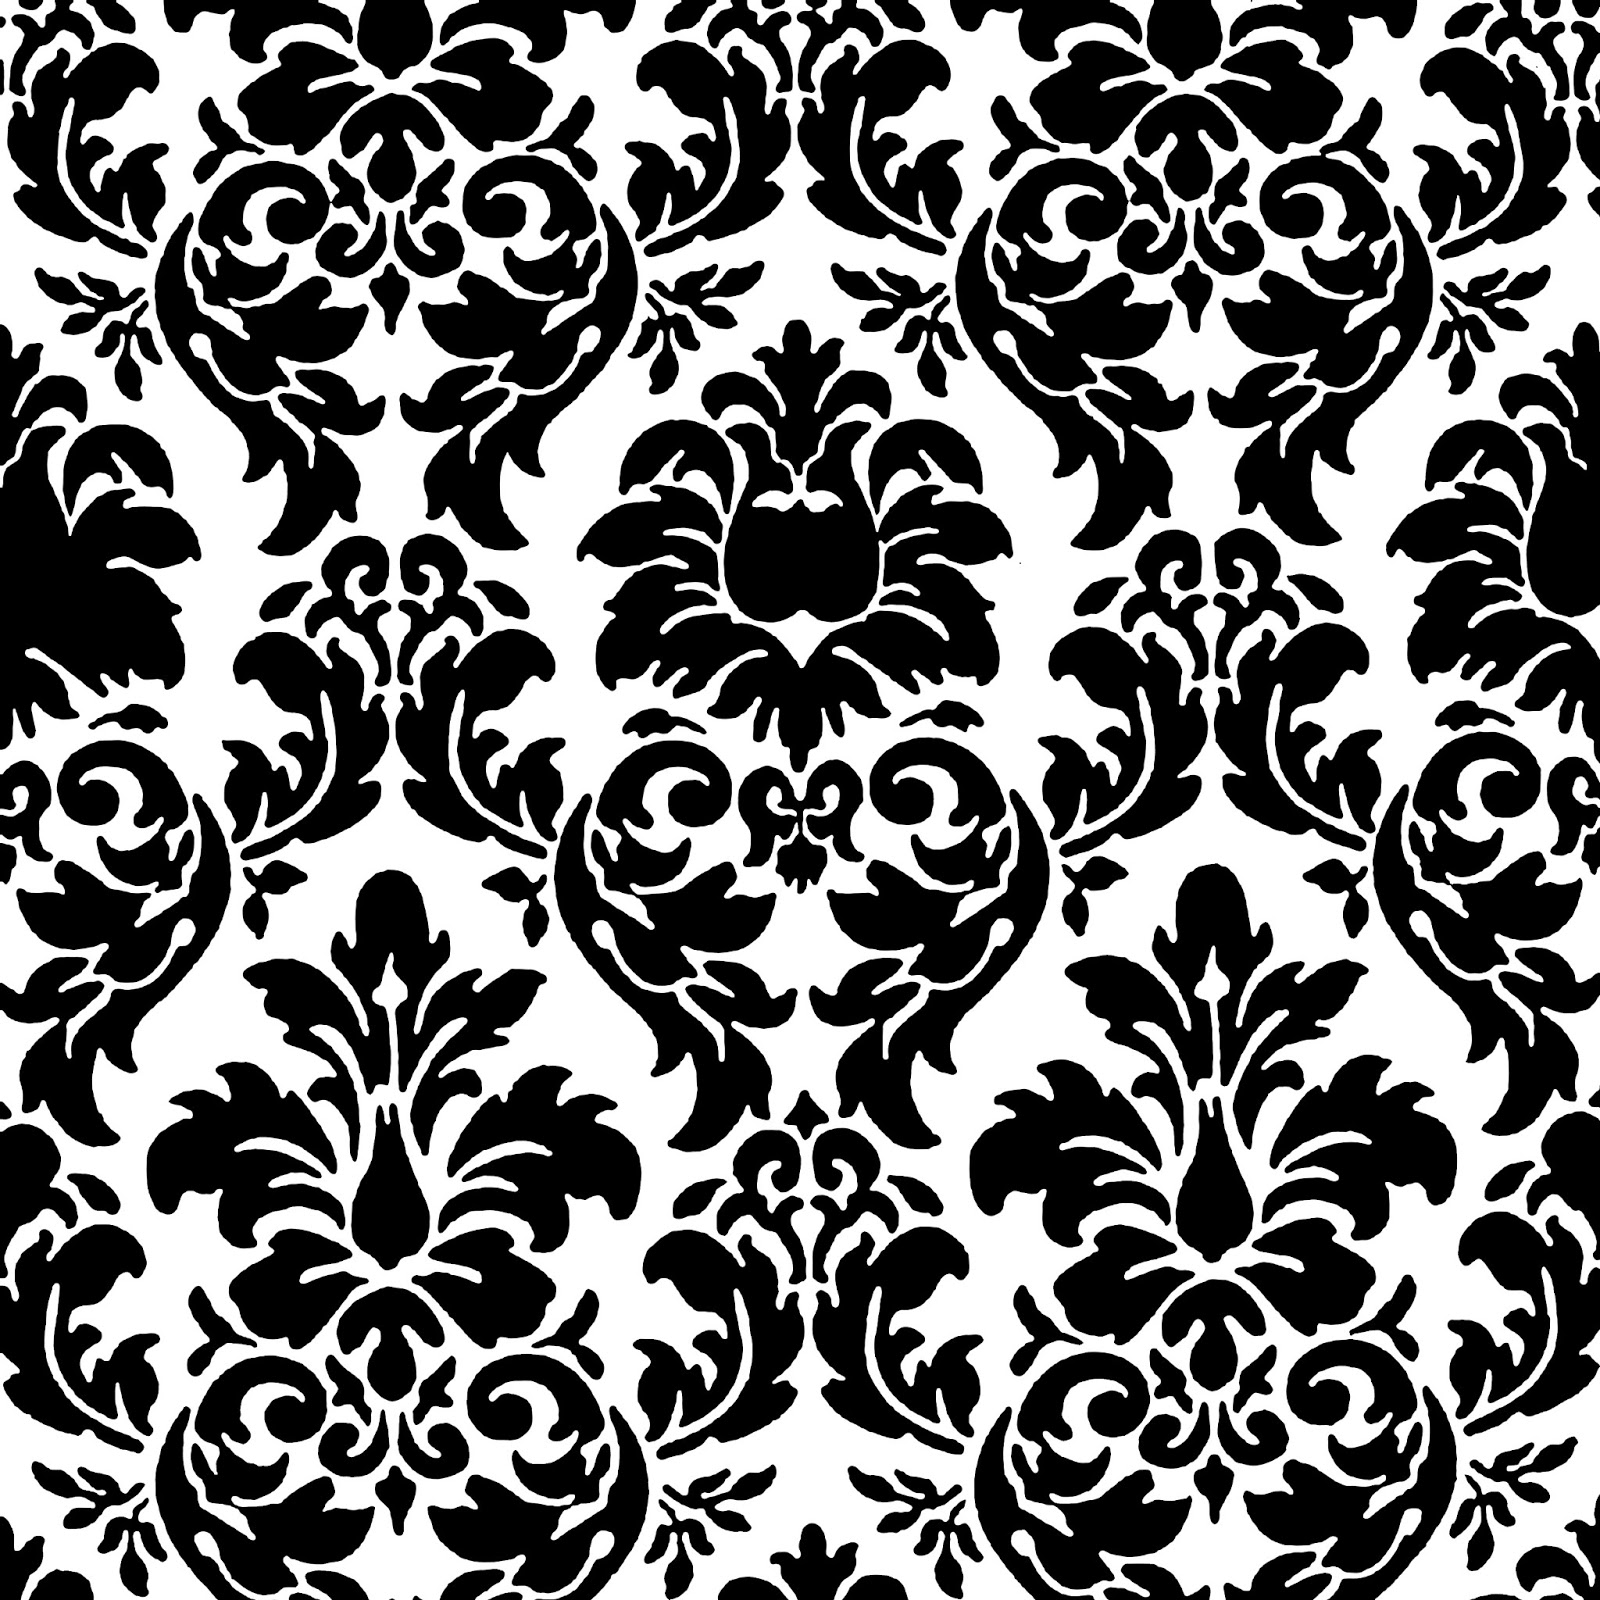 Owl pattern in black and white